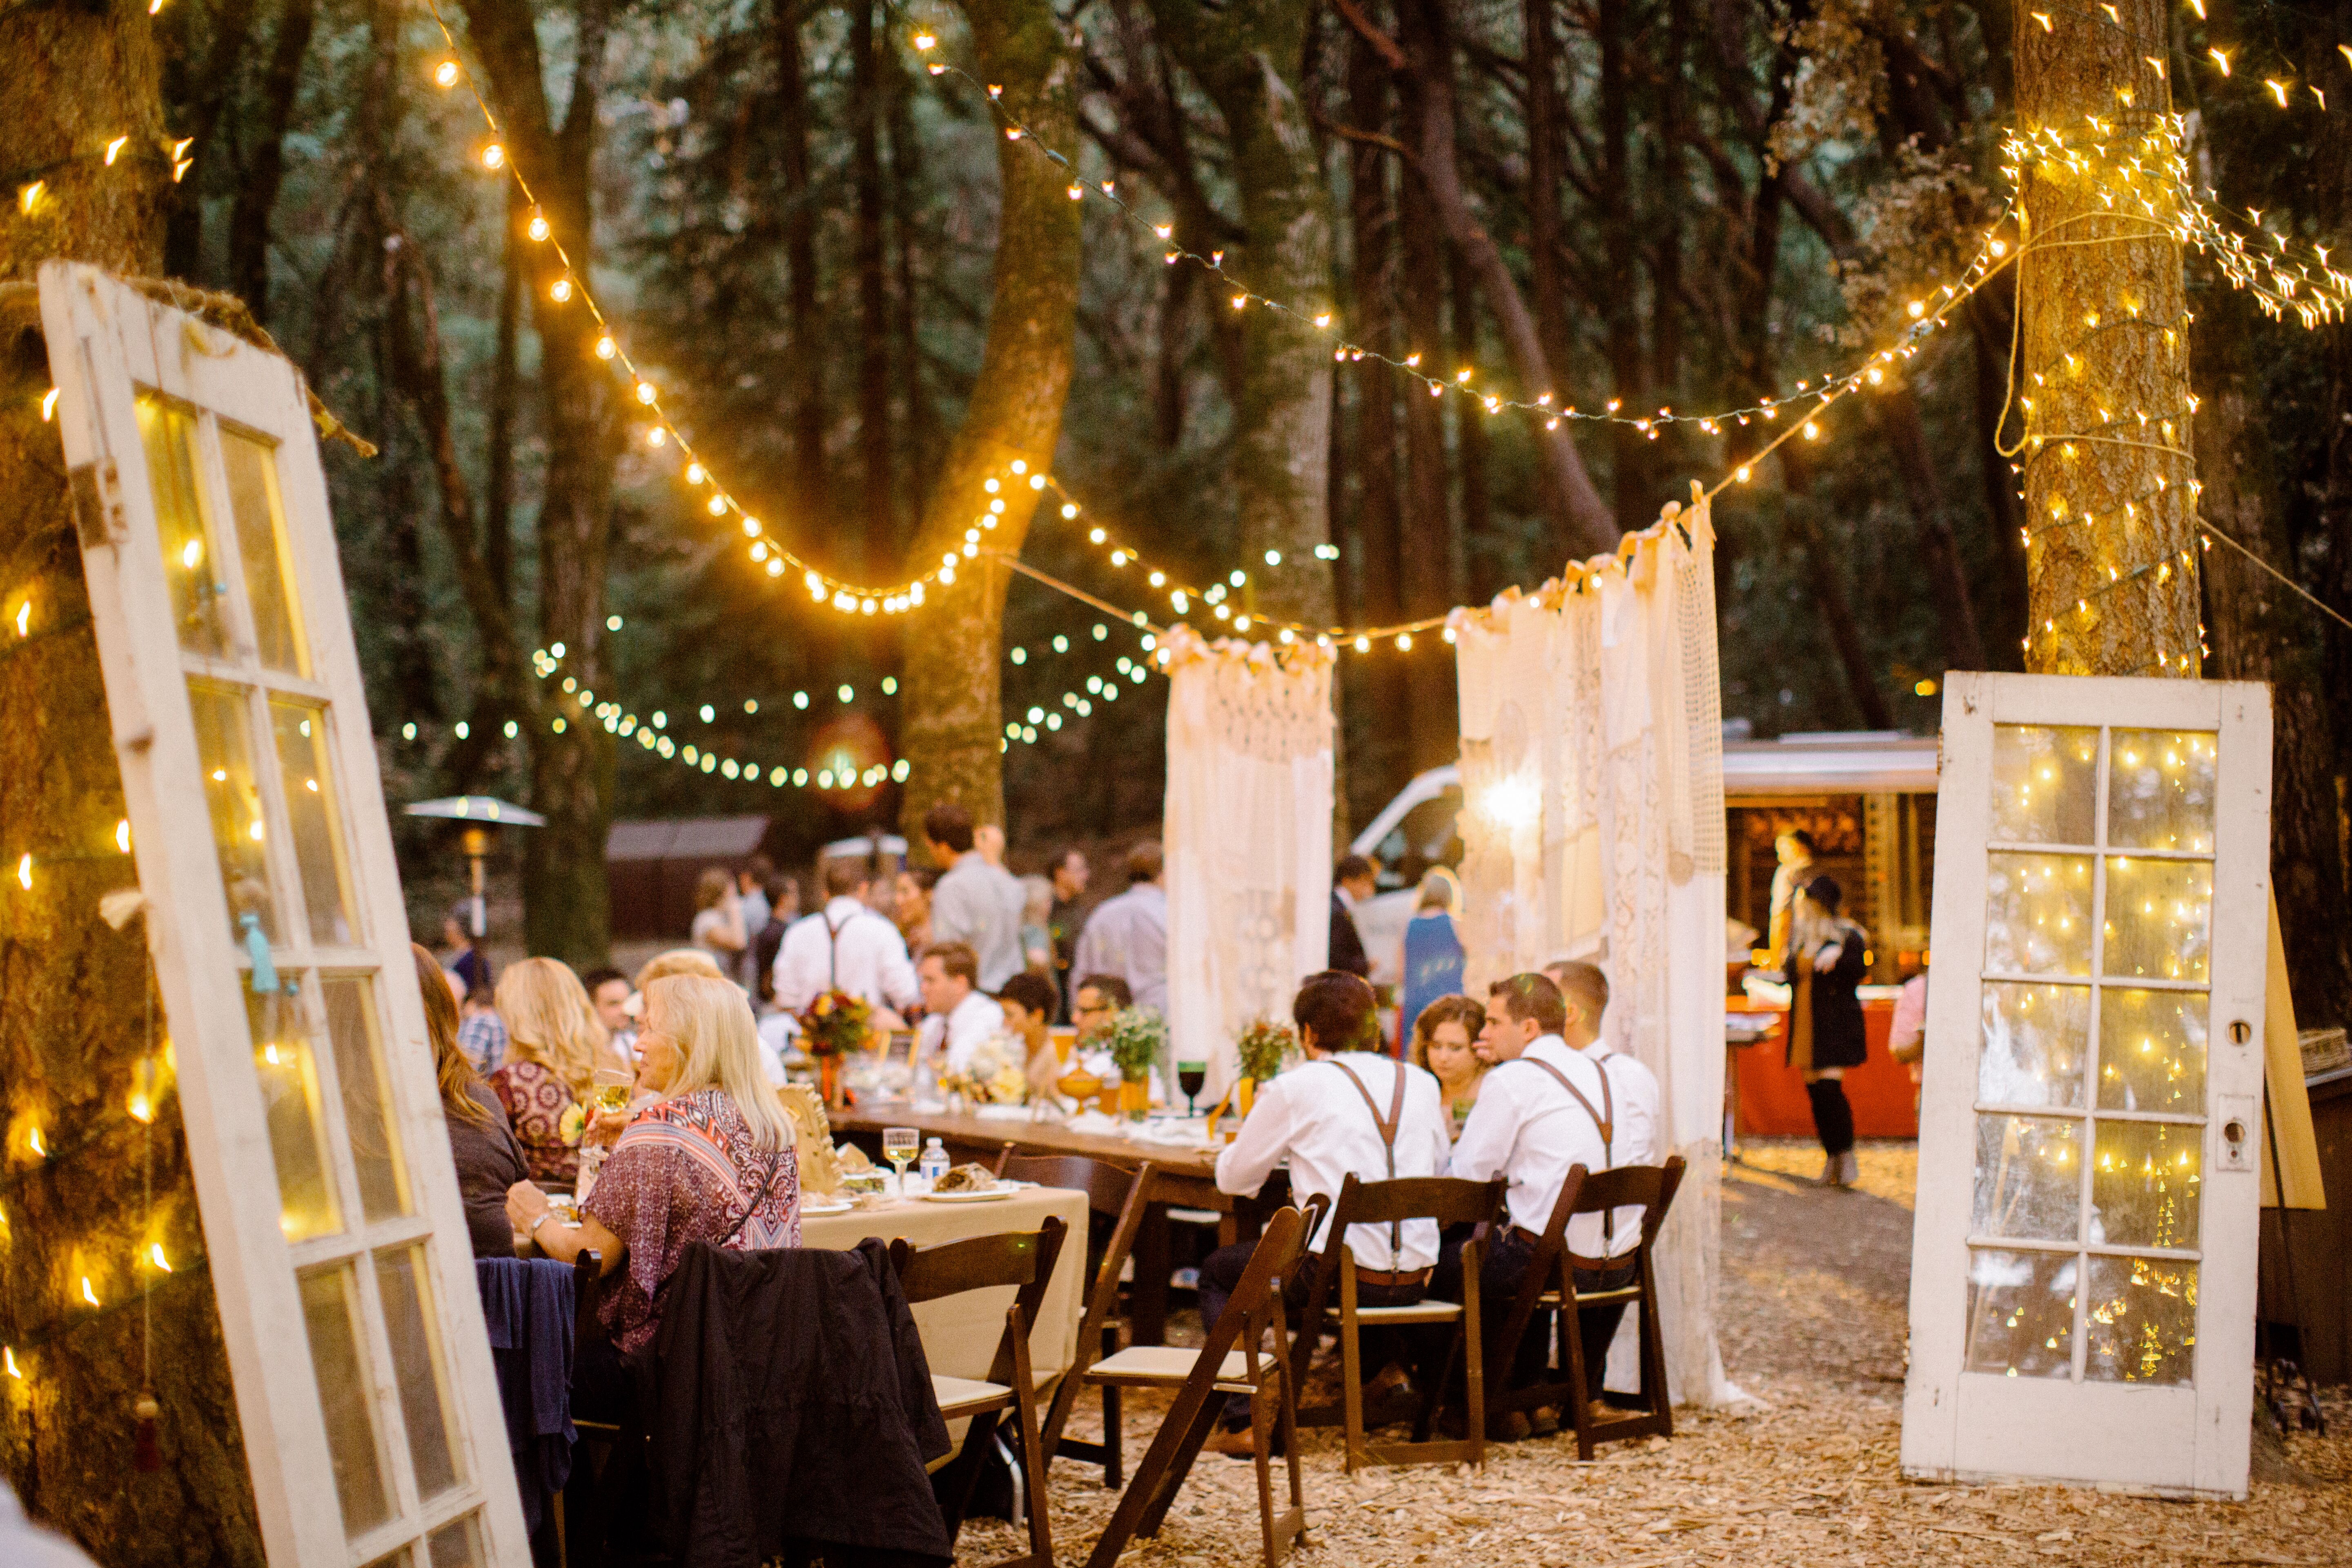 Outdoor Reception Setup With Market Lights